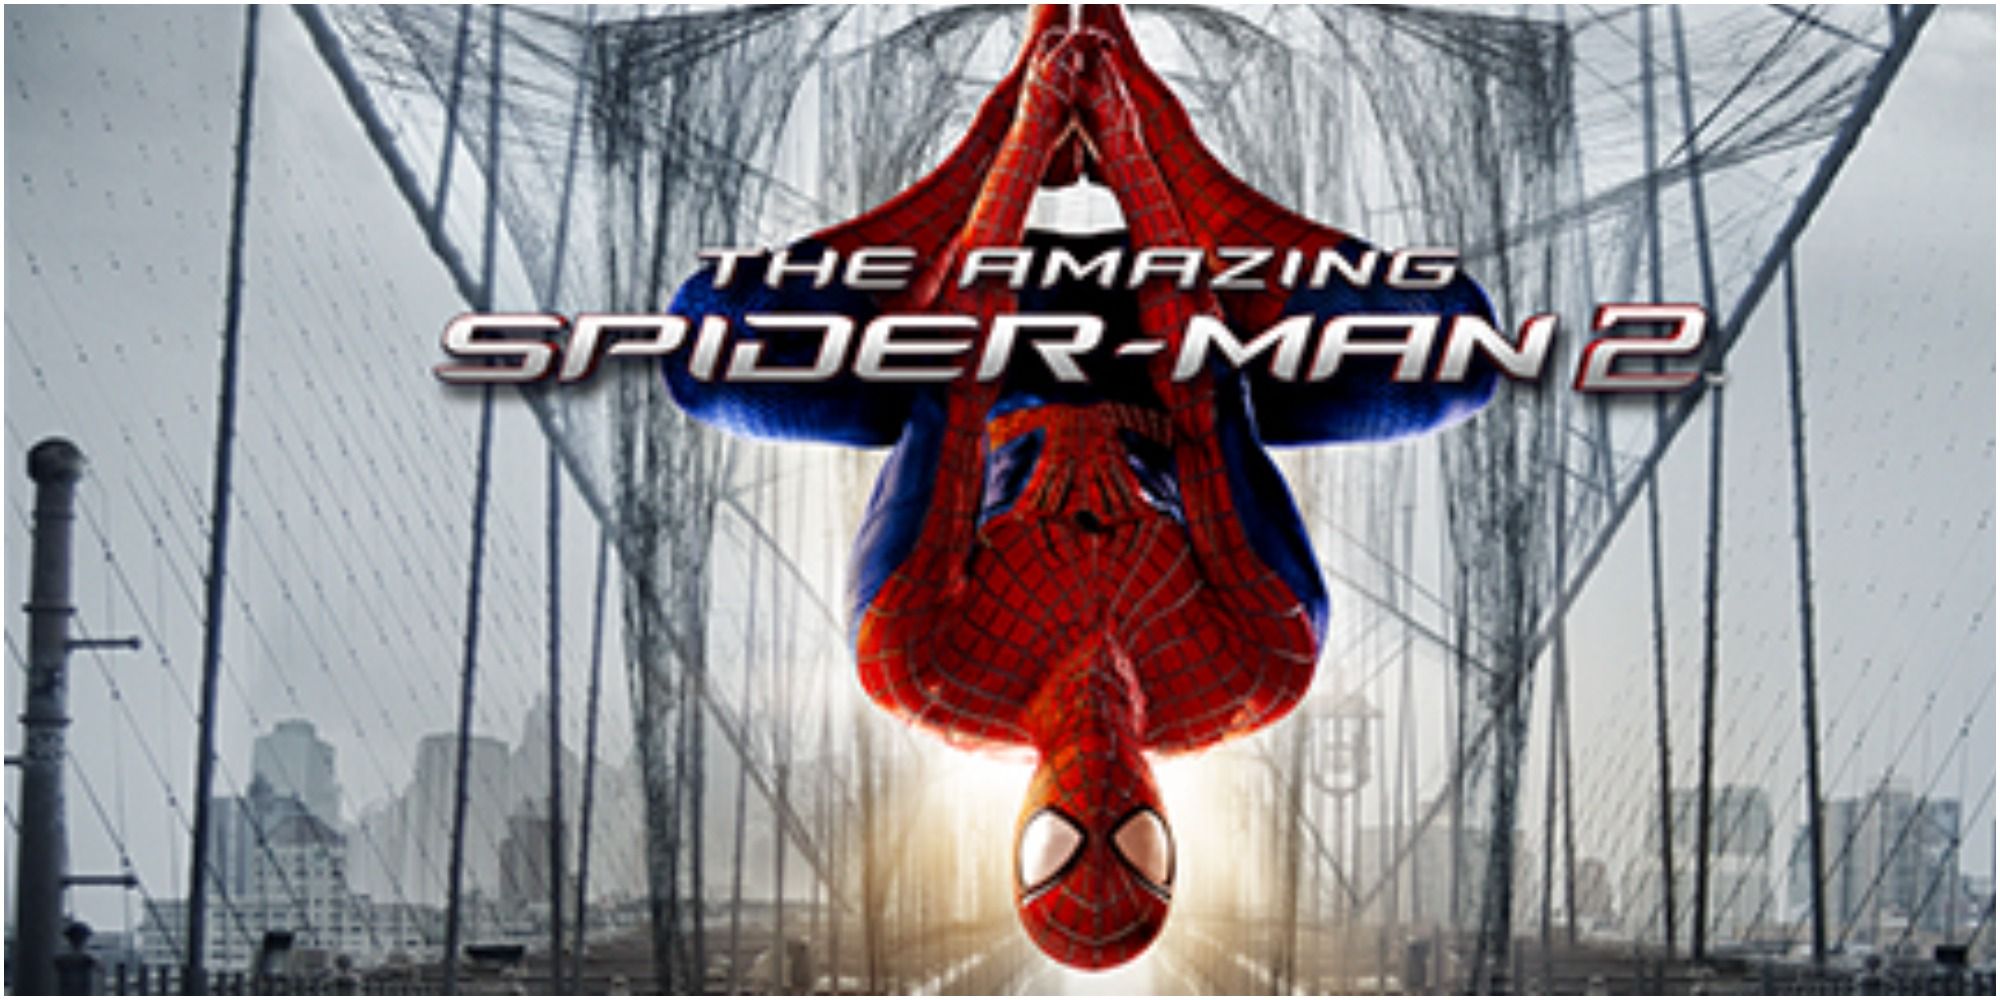 Spider-Man hanging upside down on the cover of the movie tie-in game Amazing Spider-Man 2